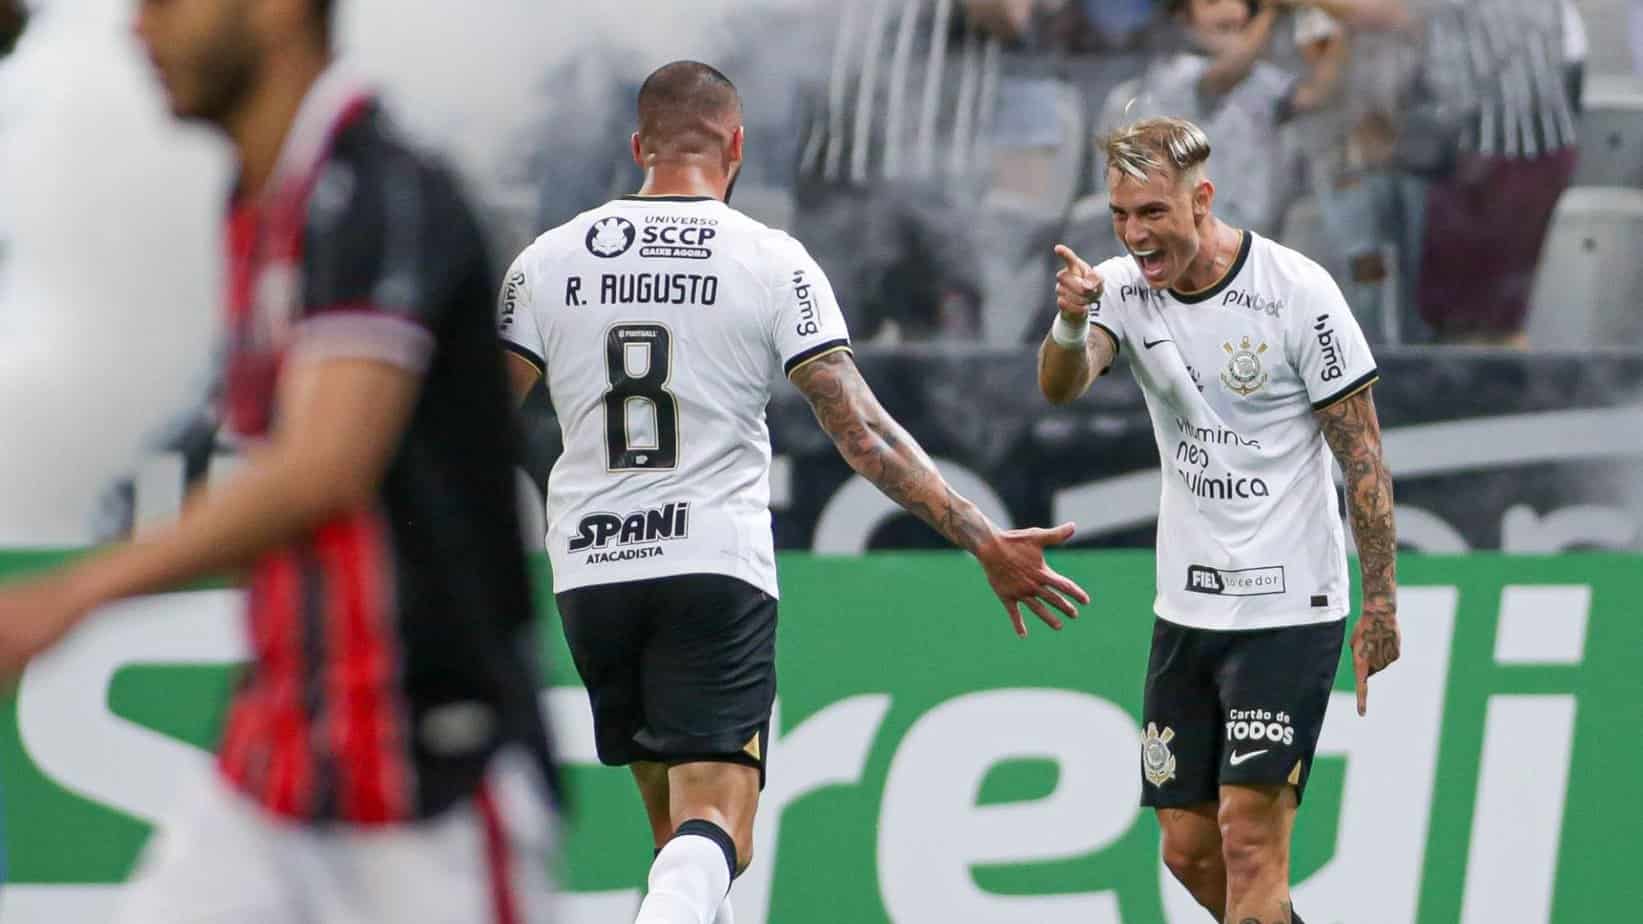 Corinthians vs. Botafogo Betting Odds and Preview